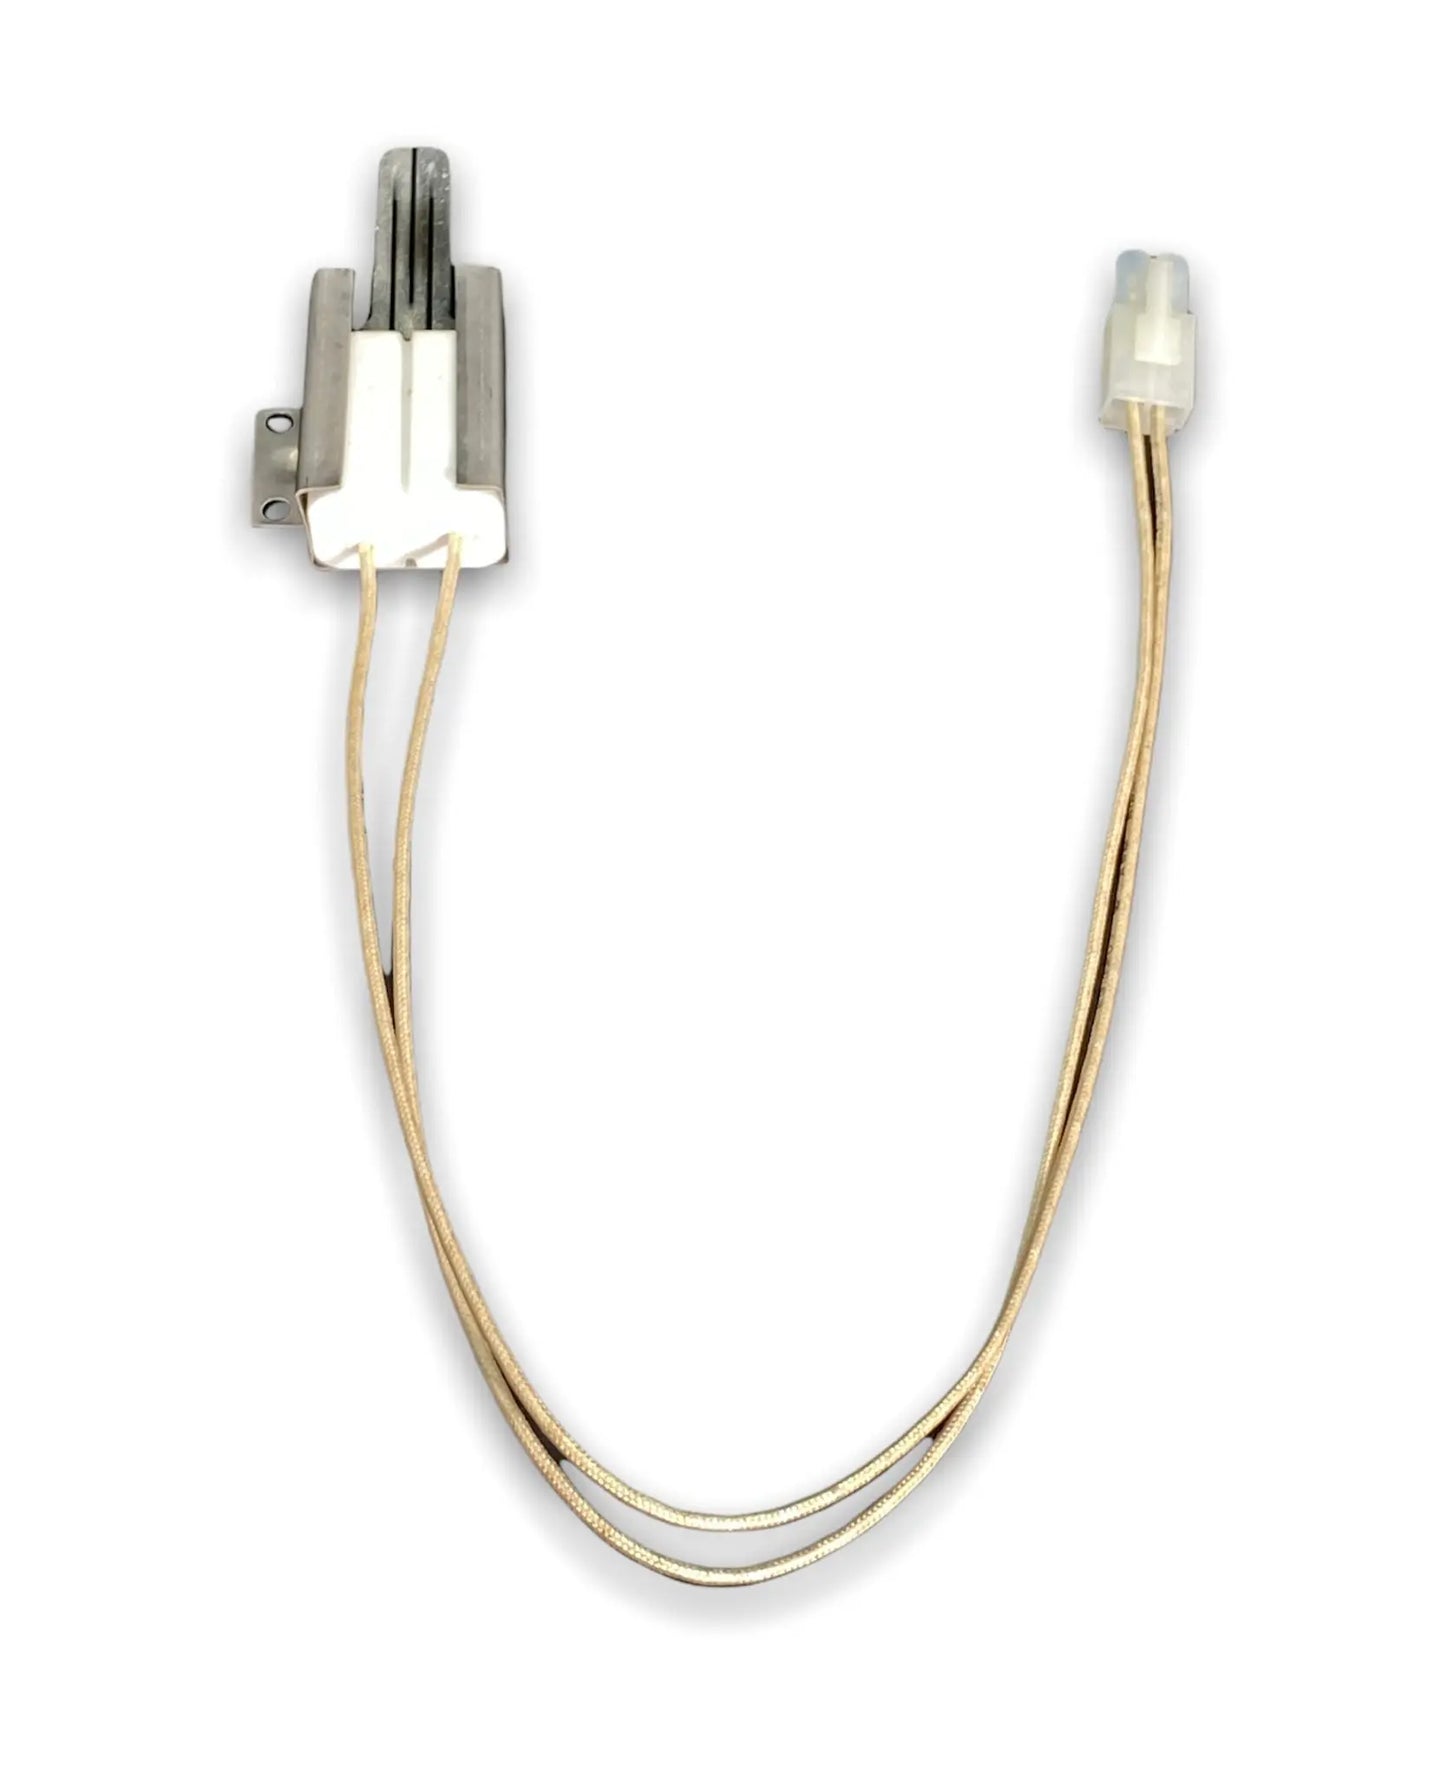 Electrolux Range Flat Gas Igniter, Hot Surface - 316489400 or 316489406, REPLACES: 1197384 PD00000633 PD00041765 316428500 316428501 5304462661  PS1528534 1615396 AP4557874  PS2581803 EAP2581803 INVERTEC